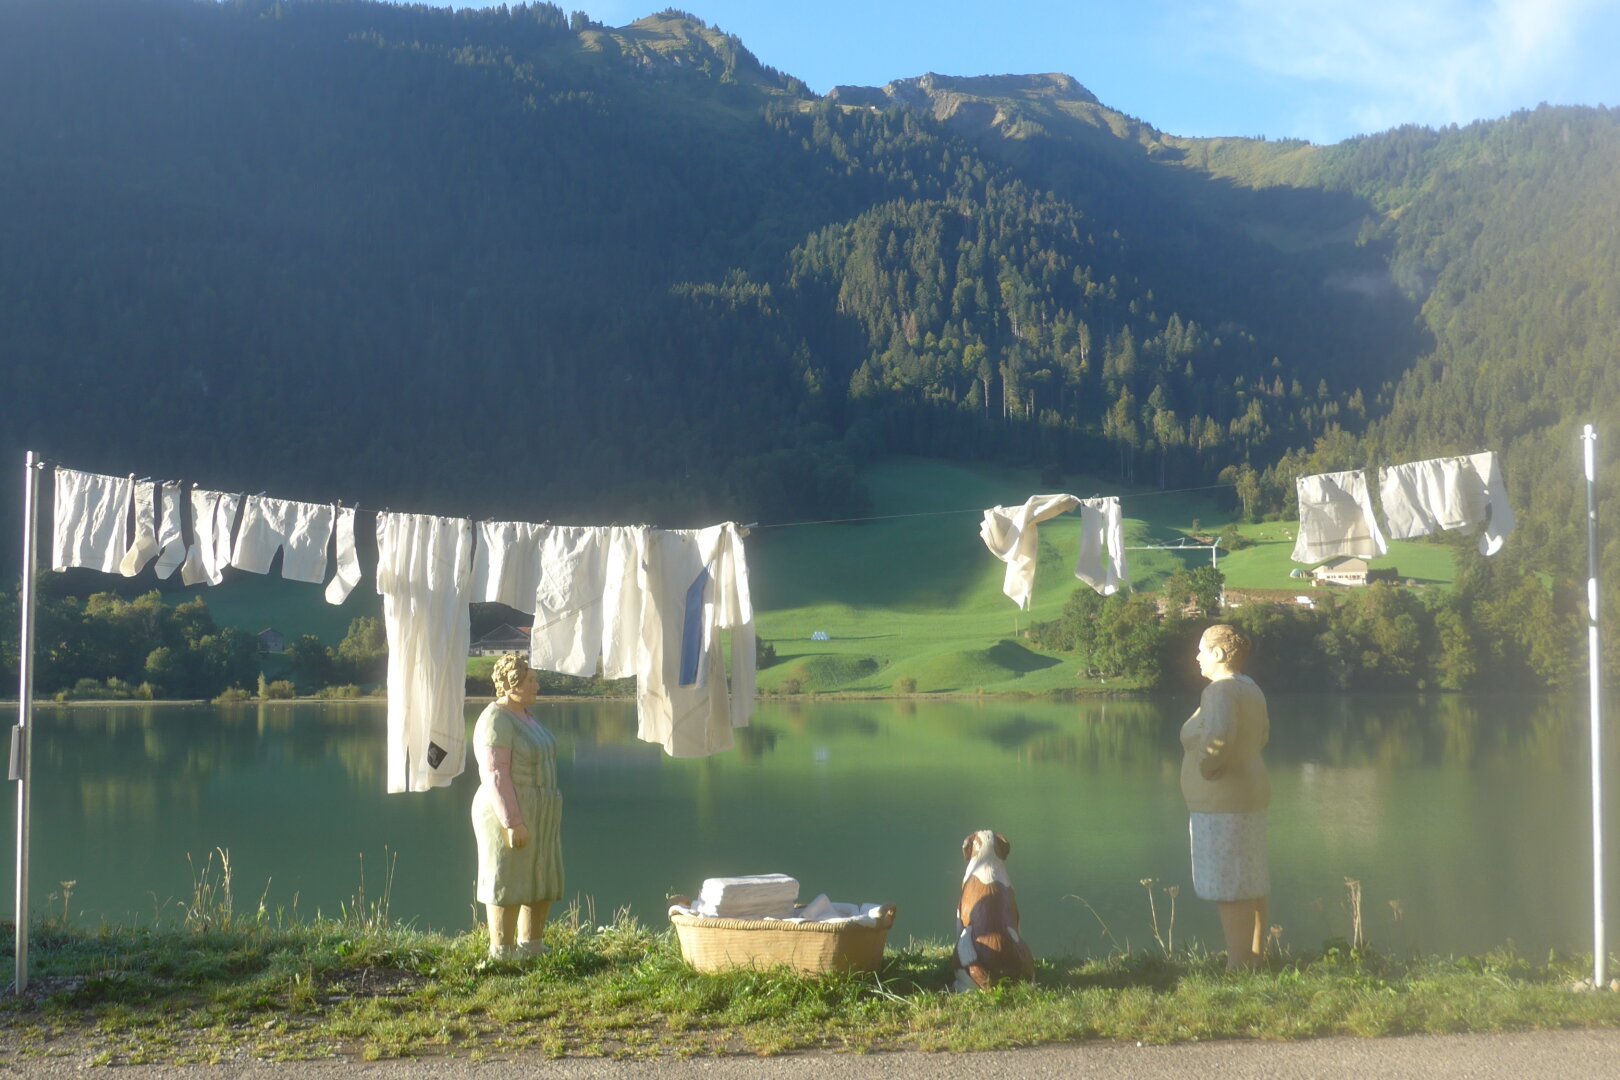 an image or two from my Pixelfed, shows a sculpture of a laundry line with two women and a dog near a mountain lake